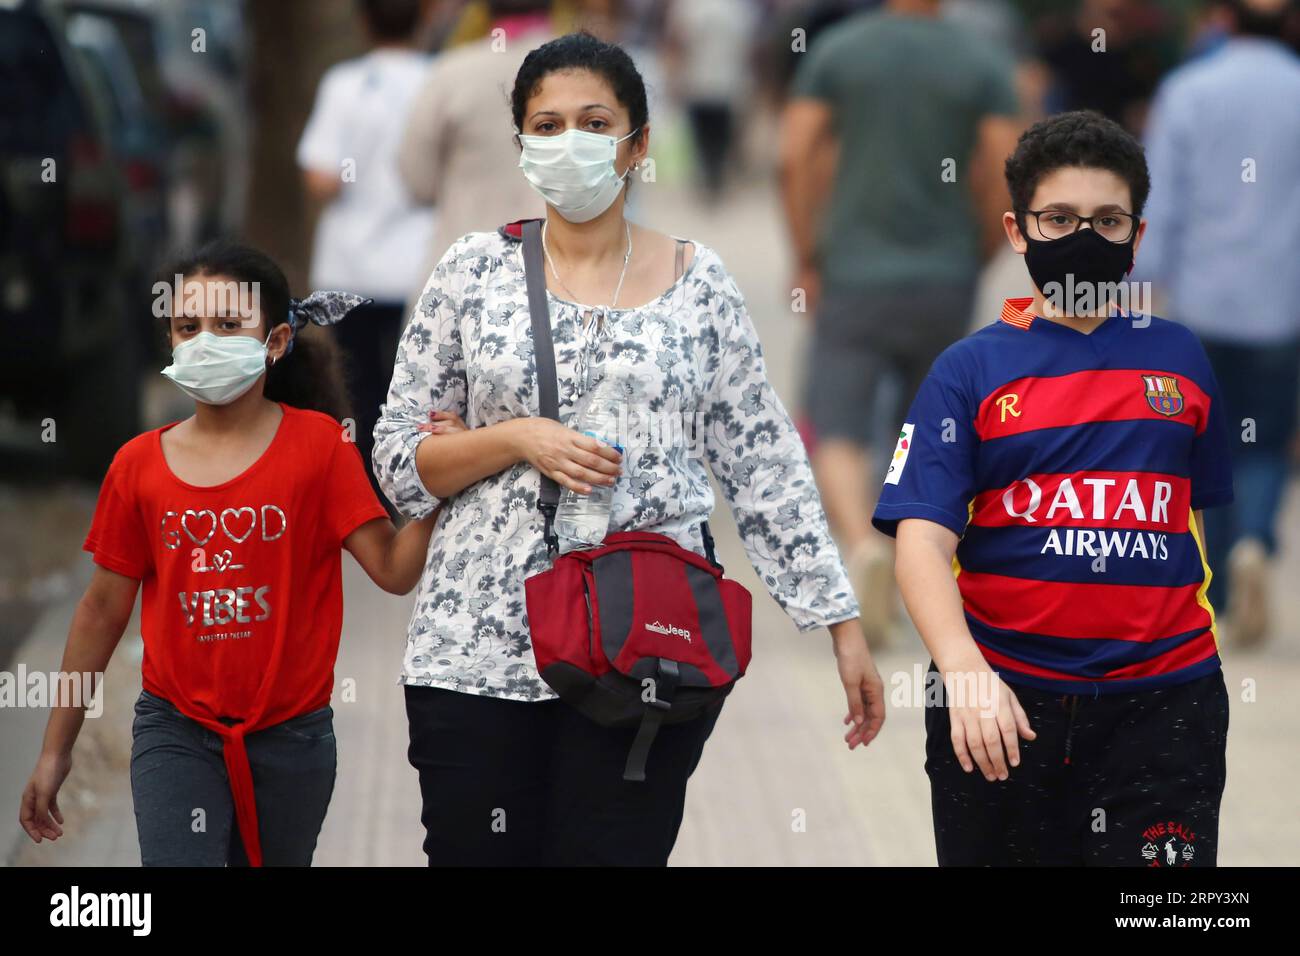 200612 -- CAIRO, June 12, 2020 Xinhua -- People wearing face masks walk on a street in Cairo, Egypt, on June 12, 2020. Egypt witnessed on Friday a record of 1,577 single-day new COVID-19 cases, raising the total infections confirmed in the country since mid-February to 41,303, said spokesman with the Health Ministry. Xinhua/Ahmed Gomaa EGYPT-CAIRO-COVID-19-CASES PUBLICATIONxNOTxINxCHN Stock Photo